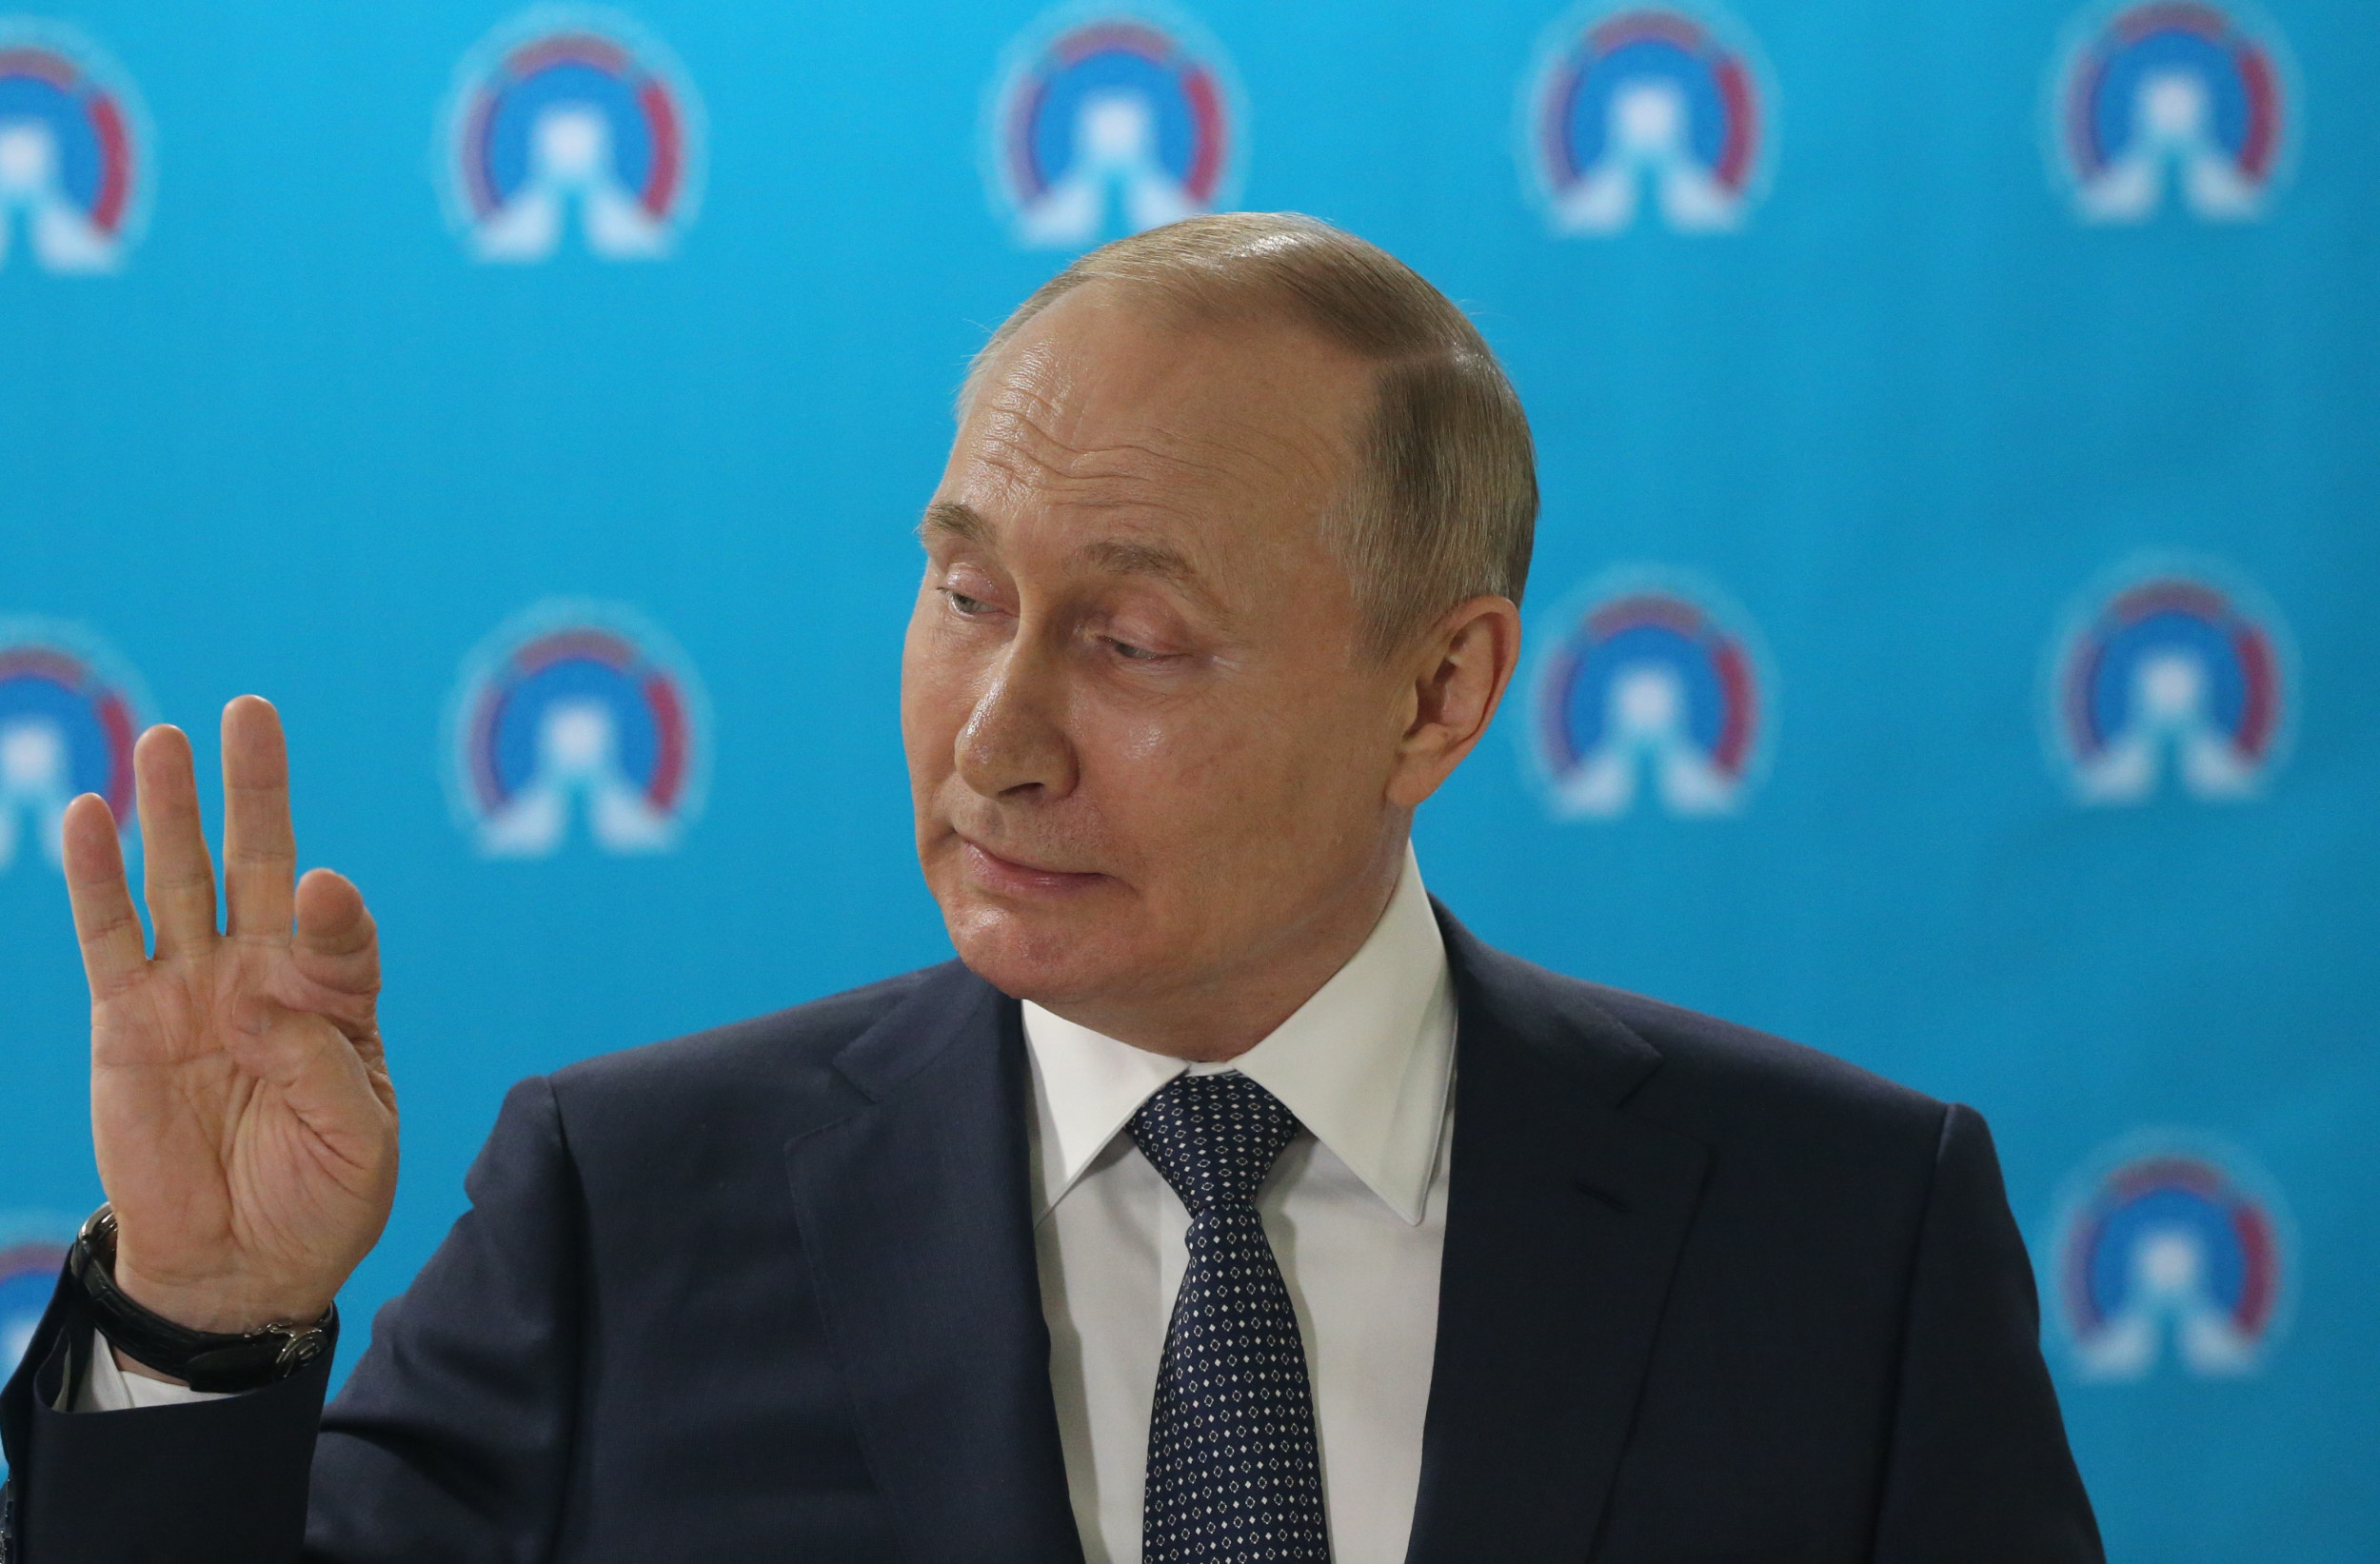 Video of Putin’s Right Arm Sparks Debate Over Russian Leader’s Health – Newsweek